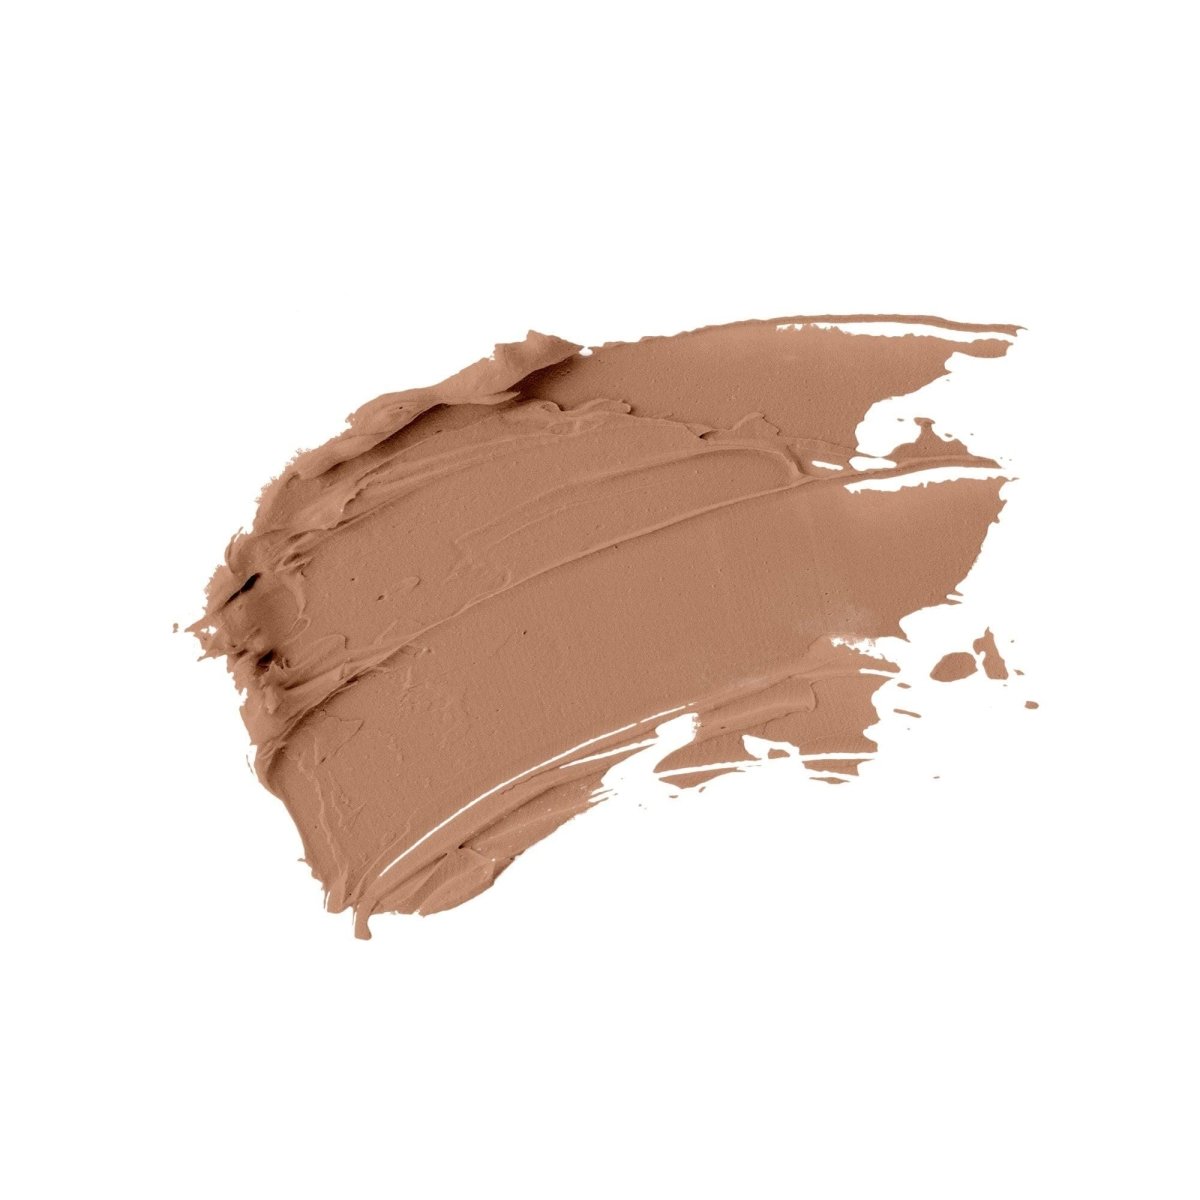 swatch of light porcelain natural liquid foundation on a white background